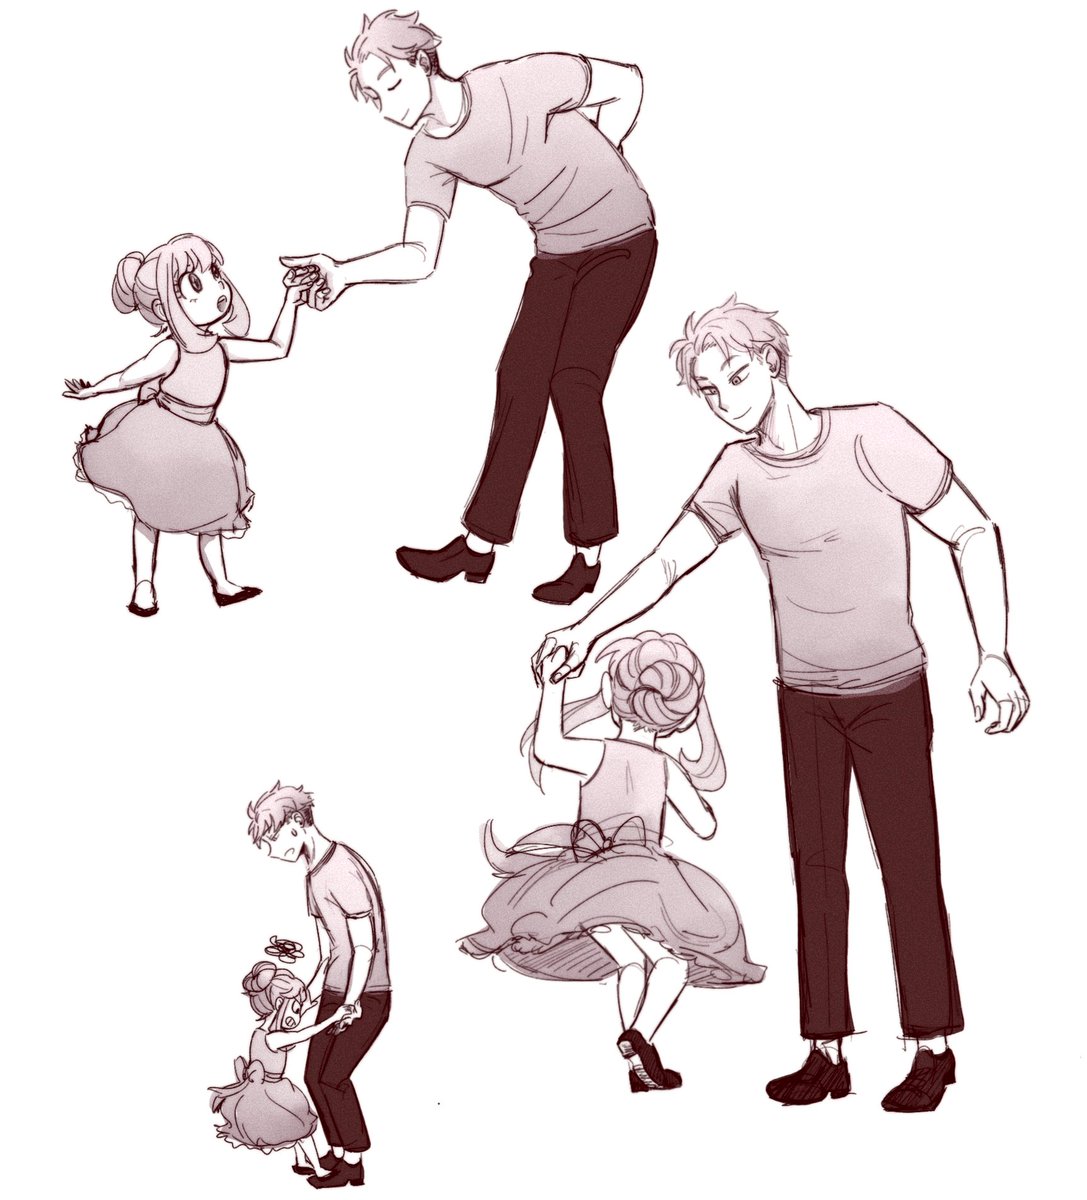 Papa made me practice with him a lot 

#SPY_FAMILY #loidAnya #Mikasdoodles